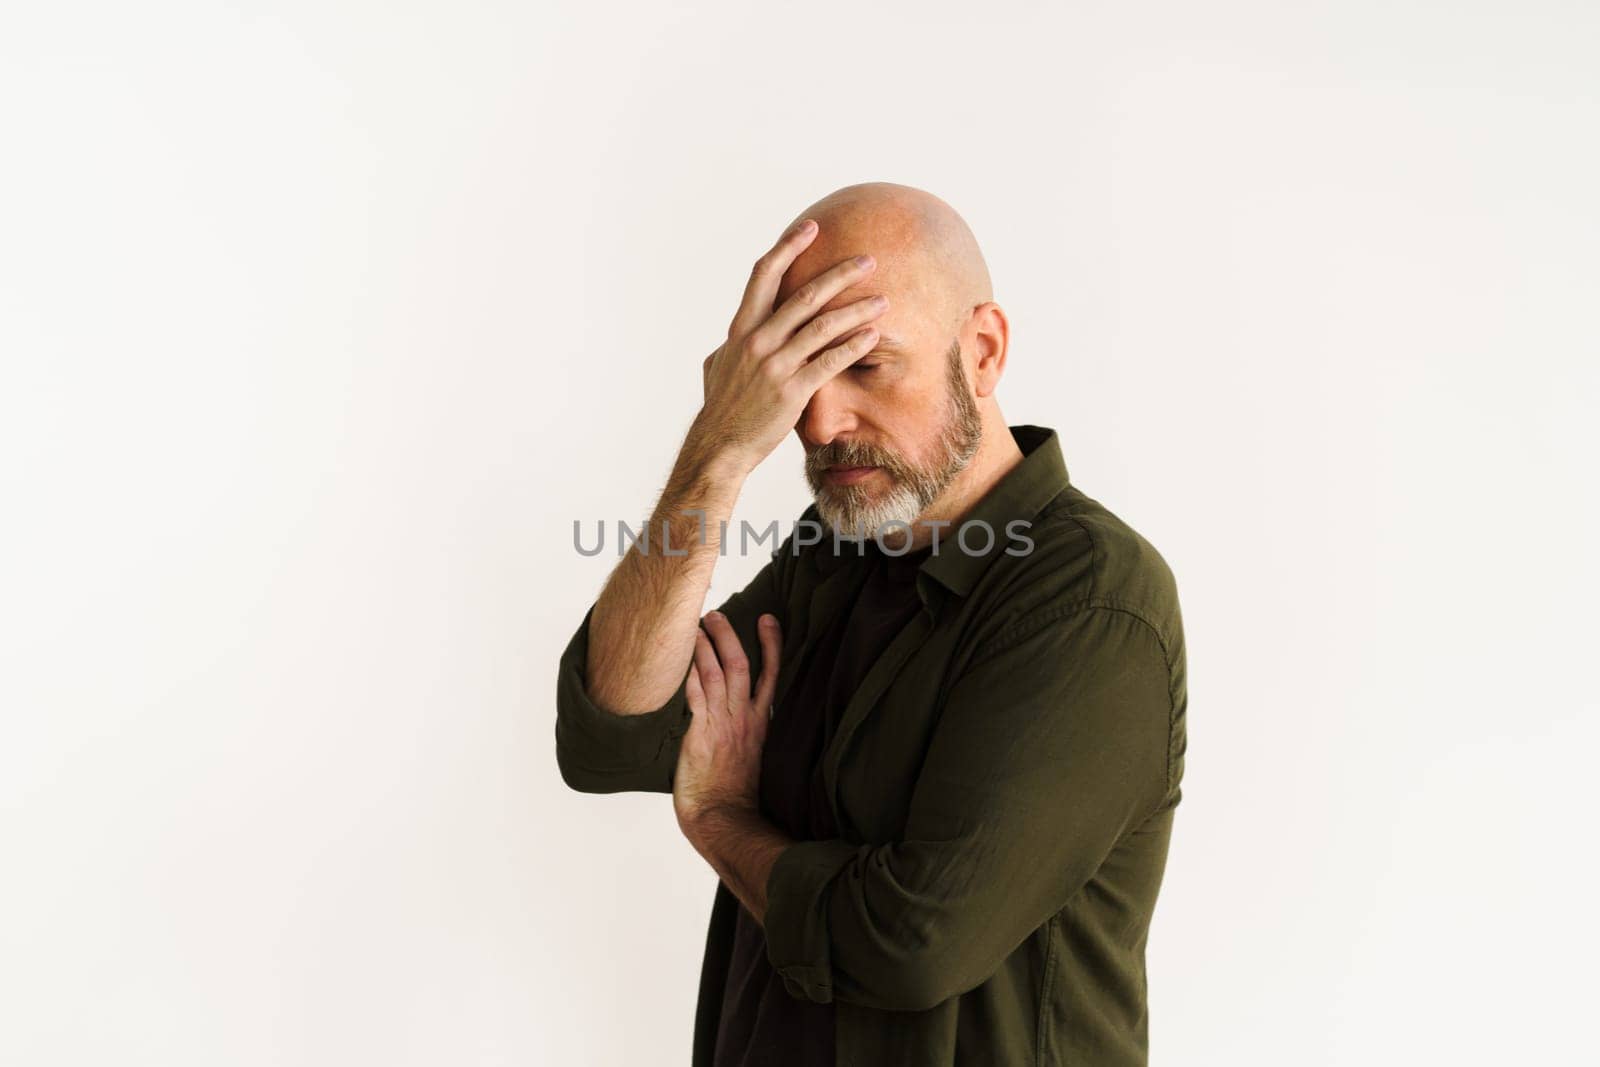 Man making facepalm gesture, expressing frustration and disappointment. Concept of problems and challenges depicted through gesture and facial expression, conveying sense of stress and exasperation. . High quality photo